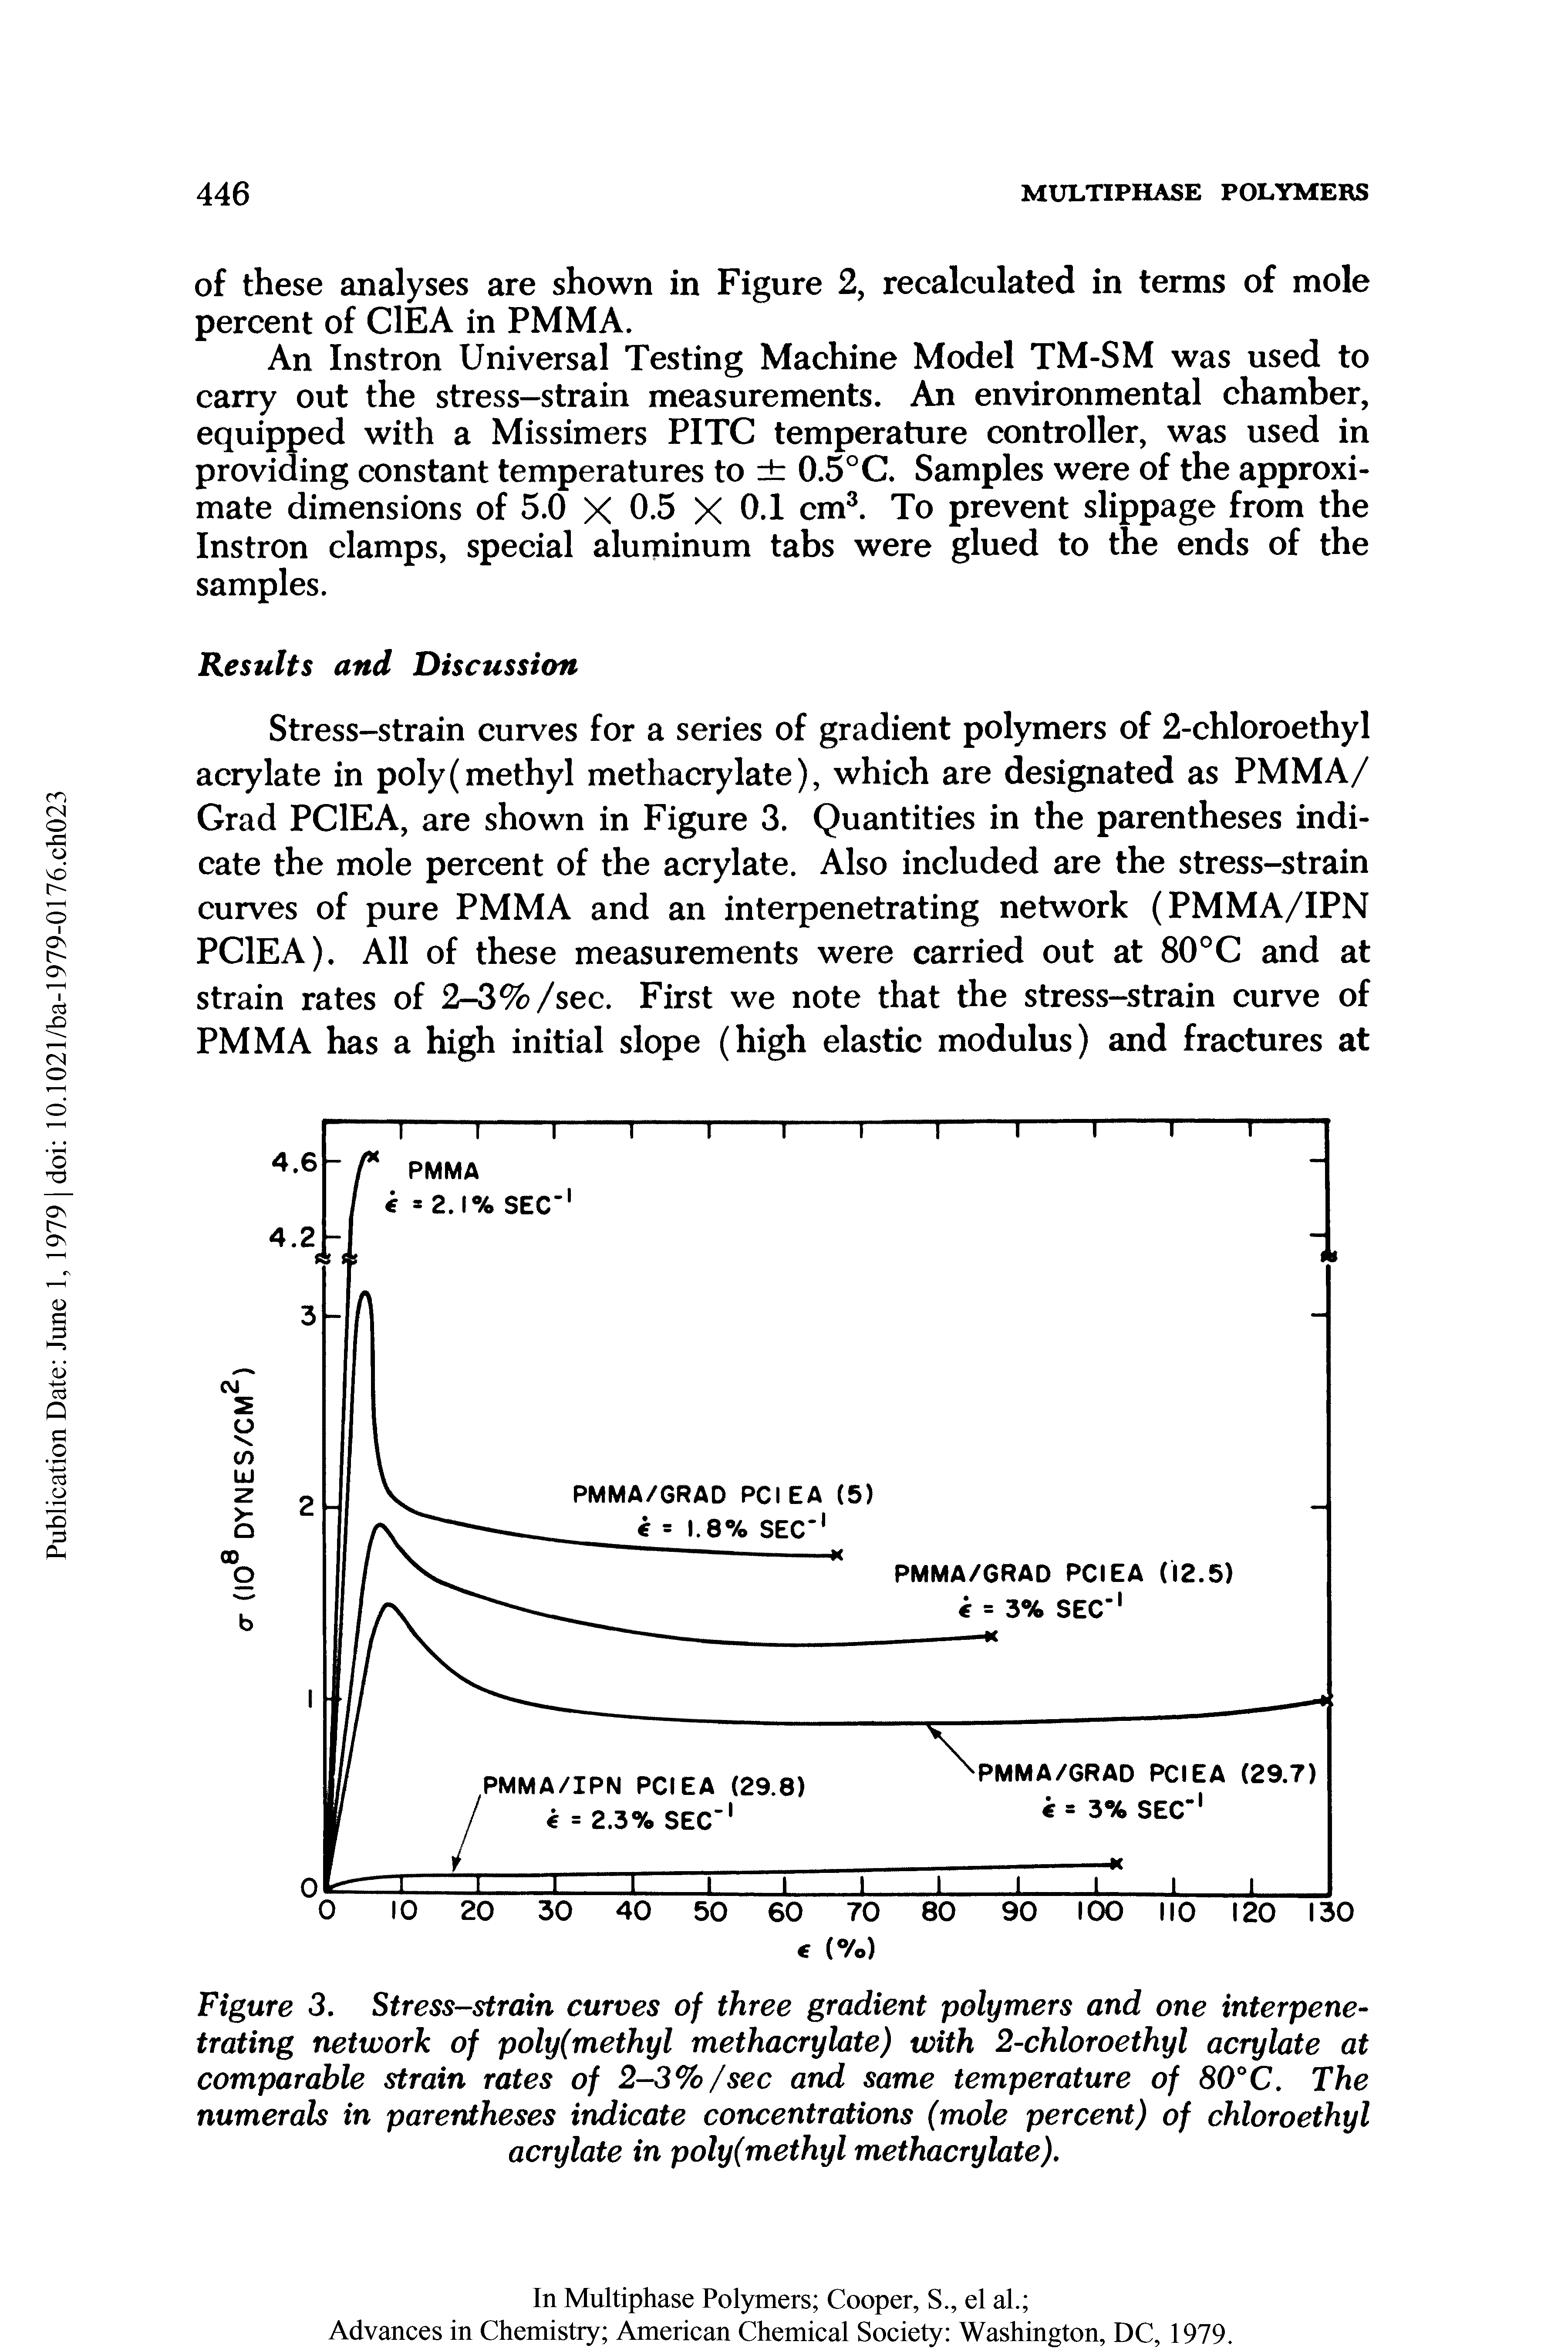 Figure 3. Stress-strain curves of three gradient polymers and one interpenetrating network of poly(methyl methacrylate) with 2-chloroethyl acrylate at comparable strain rates of 2-3% /sec and same temperature of 80° C. The numerals in parentheses indicate concentrations (mole percent) of chloroethyl acrylate in poly(methyl methacrylate).